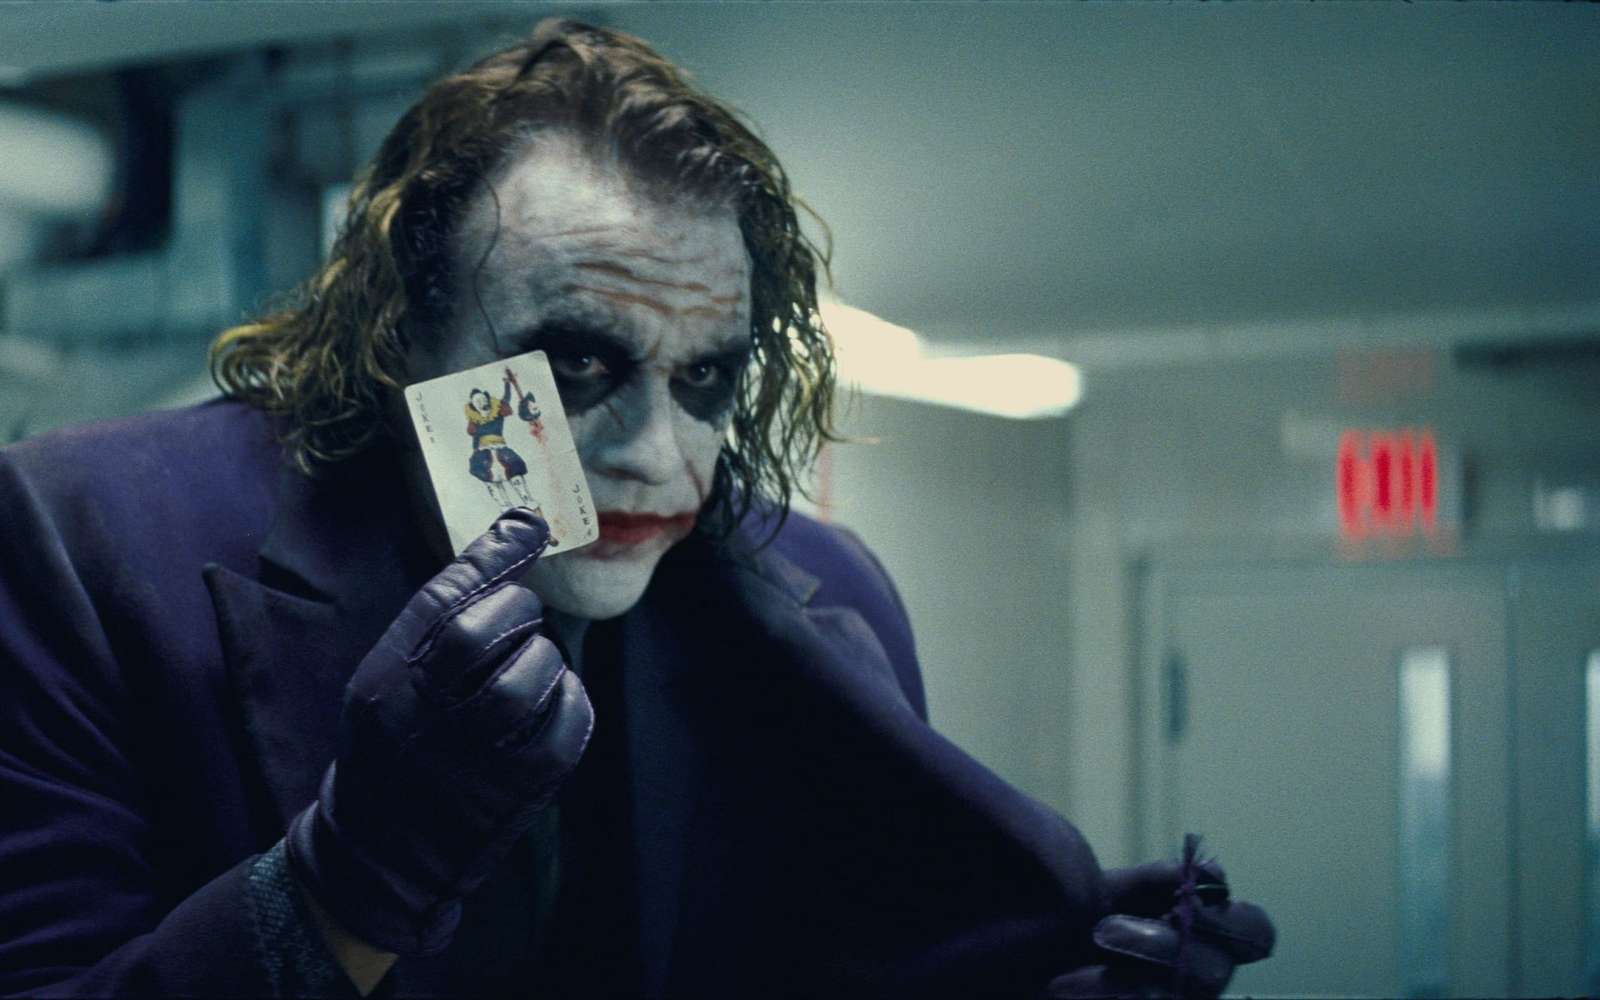 The Joker's Puzzle puzzle online from photo